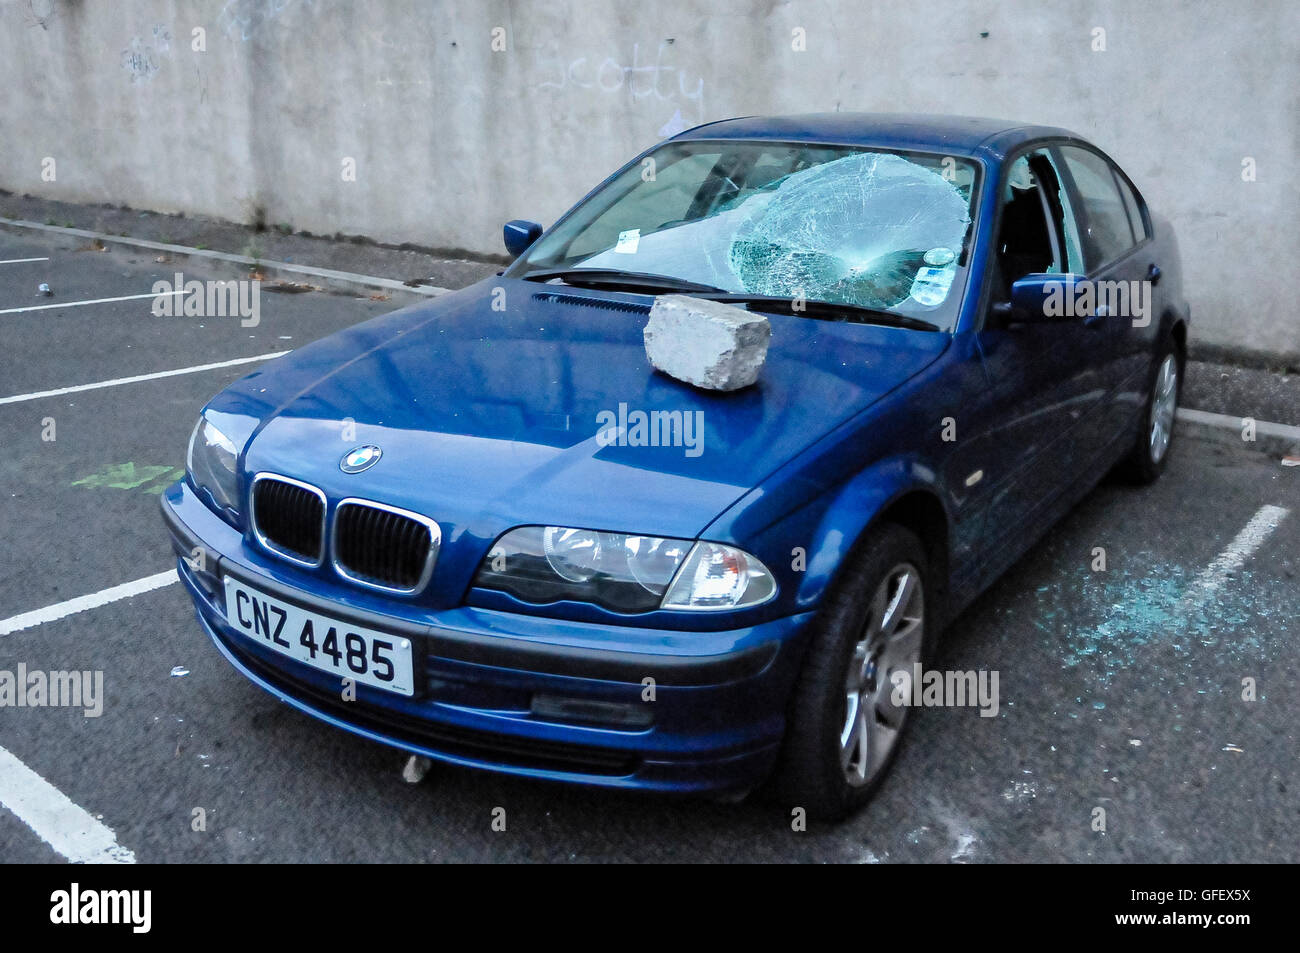 Belfast, Northern Ireland. 9th August 2013 - A blue BMW car has its windows smashed following disturbances  from loyalist protesters following an anti-Internment parade by republicans in Belfast Stock Photo